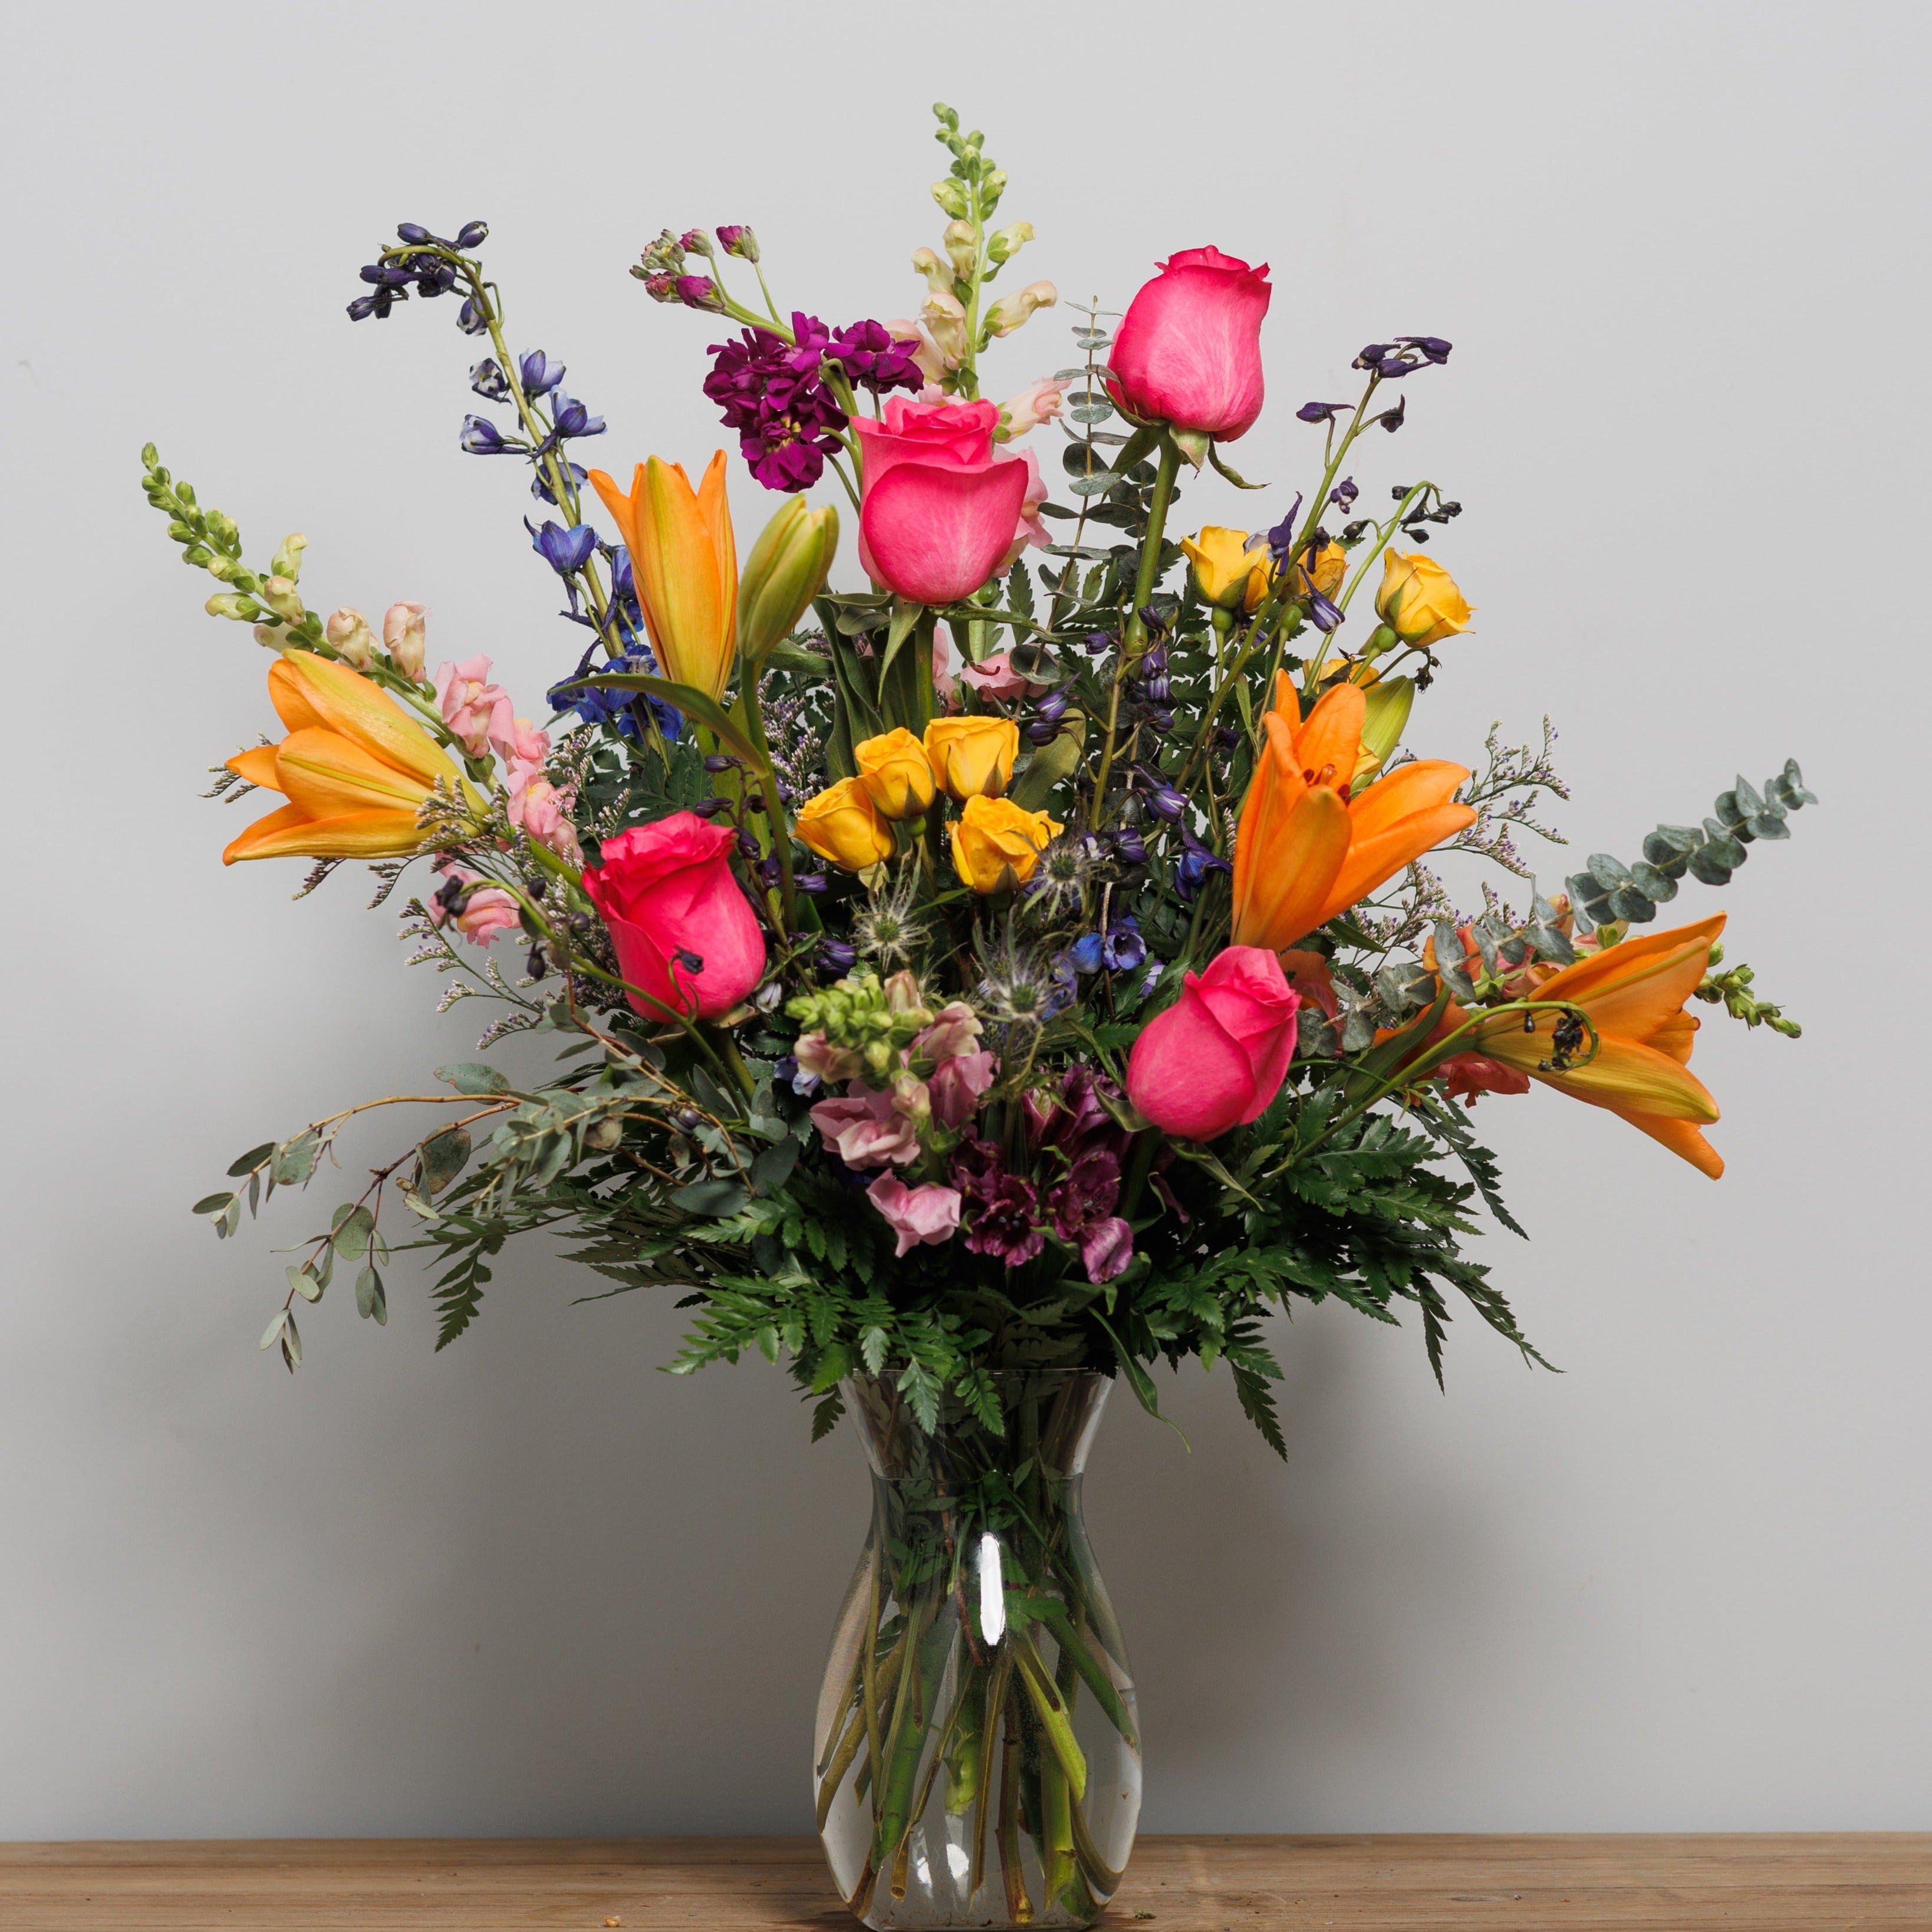 A bright arrangement with orange lilies and hot pink roses.